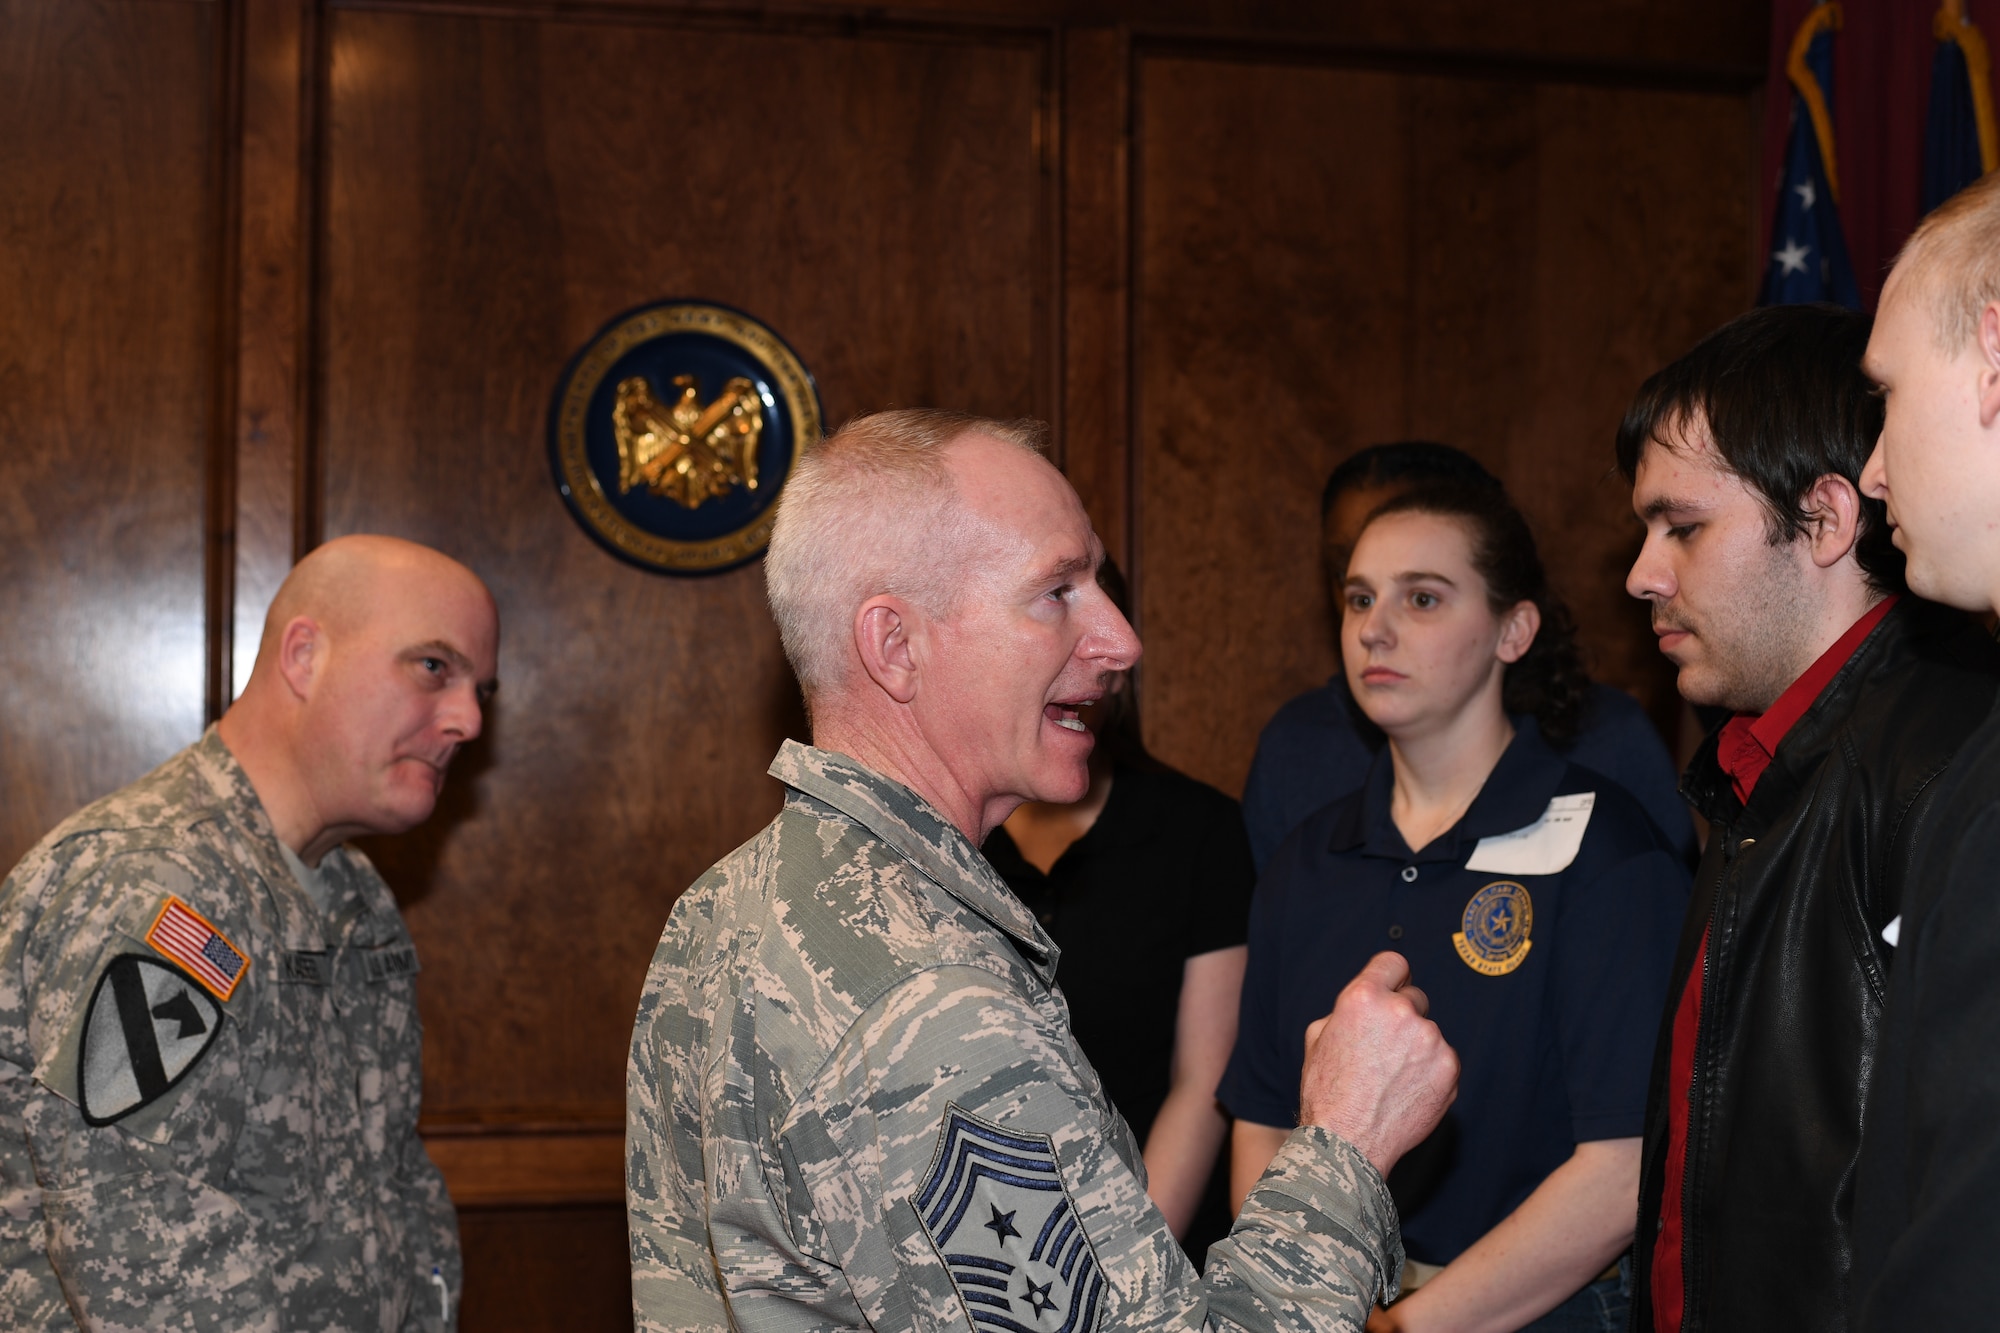 Chief Master Sgt. Alan Boling, 8th Air Force command chief, gives advice as the newly sworn-in recruits prepare to ship out to basic training.